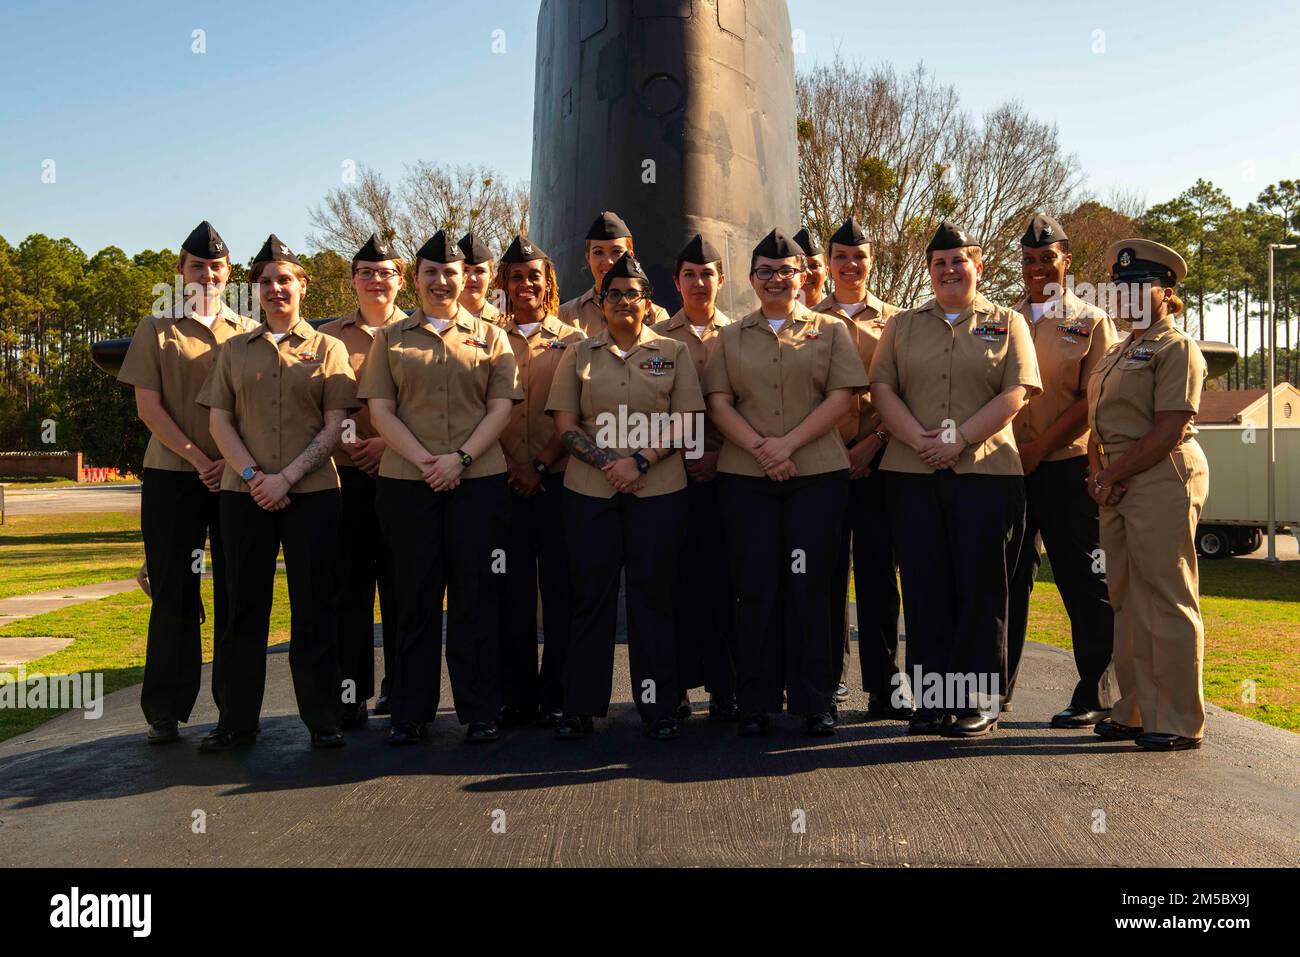 KINGS BAY, Ga. (Feb. 24, 2022) The enlisted women assigned to the Blue Crew of the Ohio-class ballistic-missile submarine USS Wyoming (SSBN 742) stand in formation at the USS Bancroft static display outside the gate at Naval Submarine Base Kings Bay, Georgia. The 15 submariners recently made history when they became the first enlisted female crew to complete a ballistic-missile submarine deterrent patrol. Wyoming is homeported at the base which is home to all East Coast Ohio-class submarines. Stock Photo